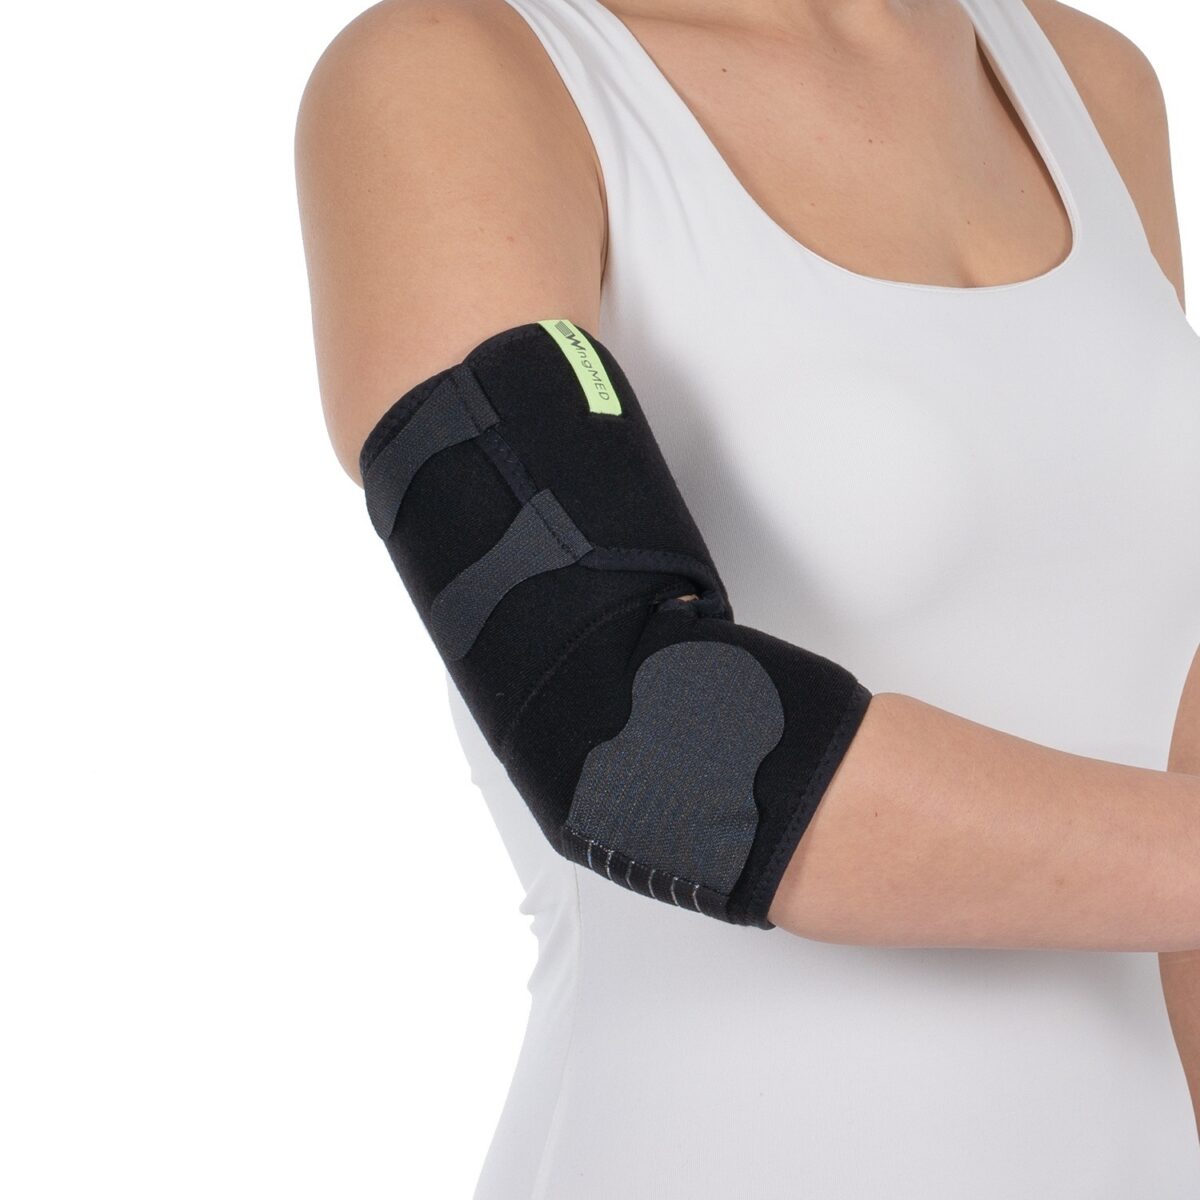 wingmed orthopedic equipments W203 W205 tennis elbow support 2